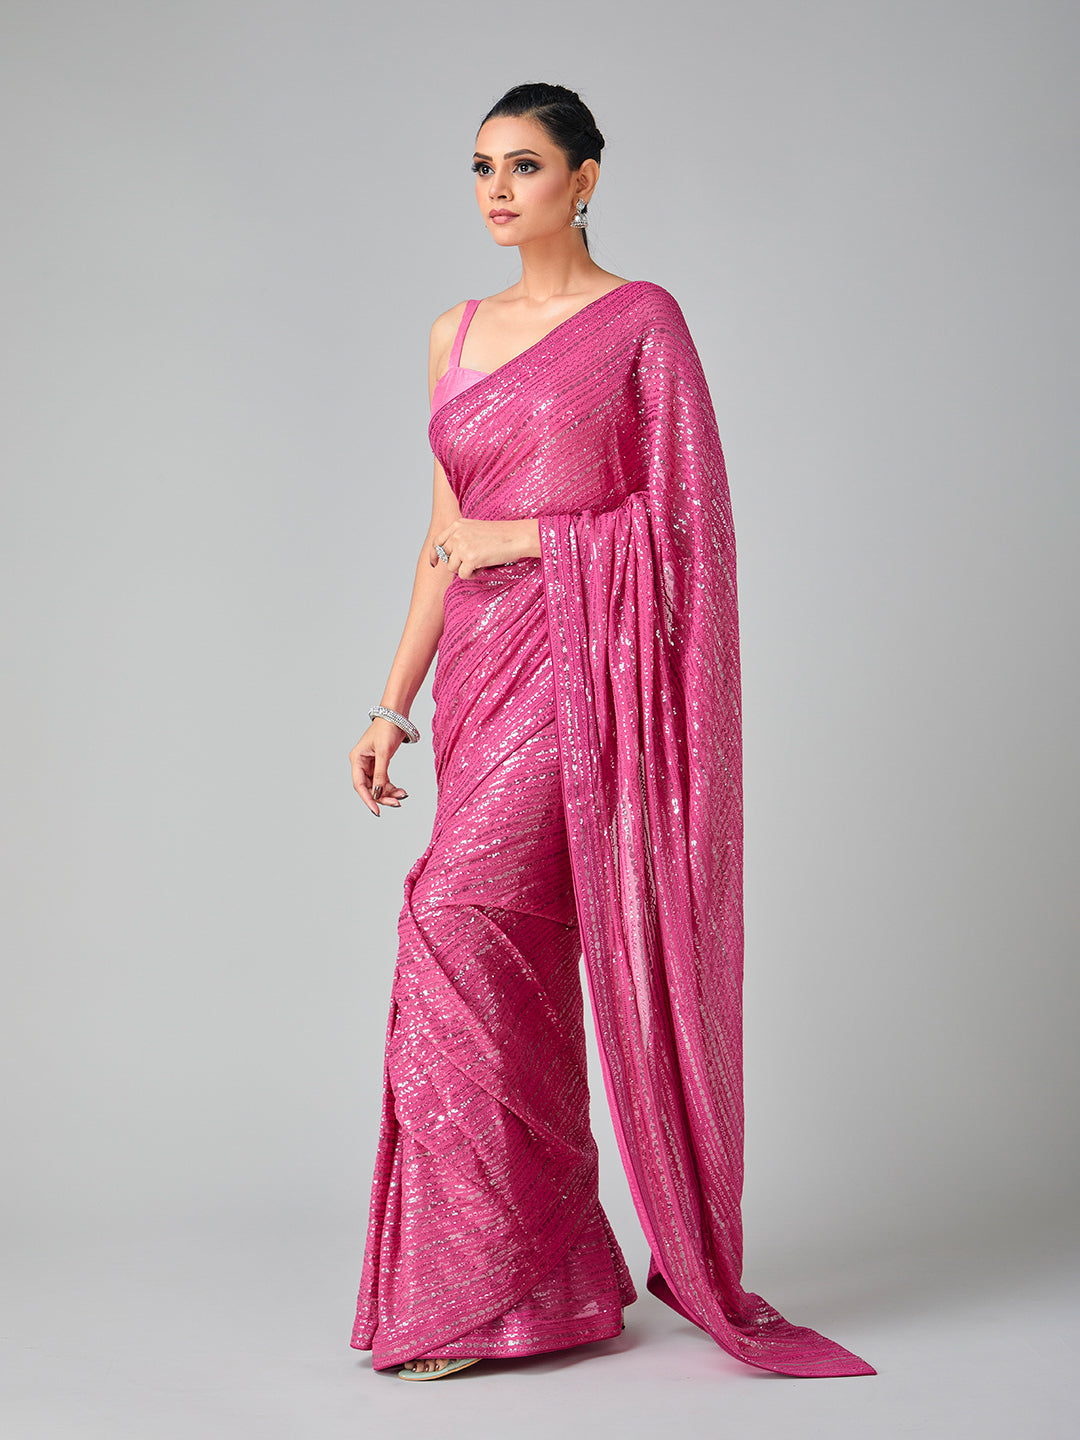 Shimmery Pink & Gold Sequin Saree